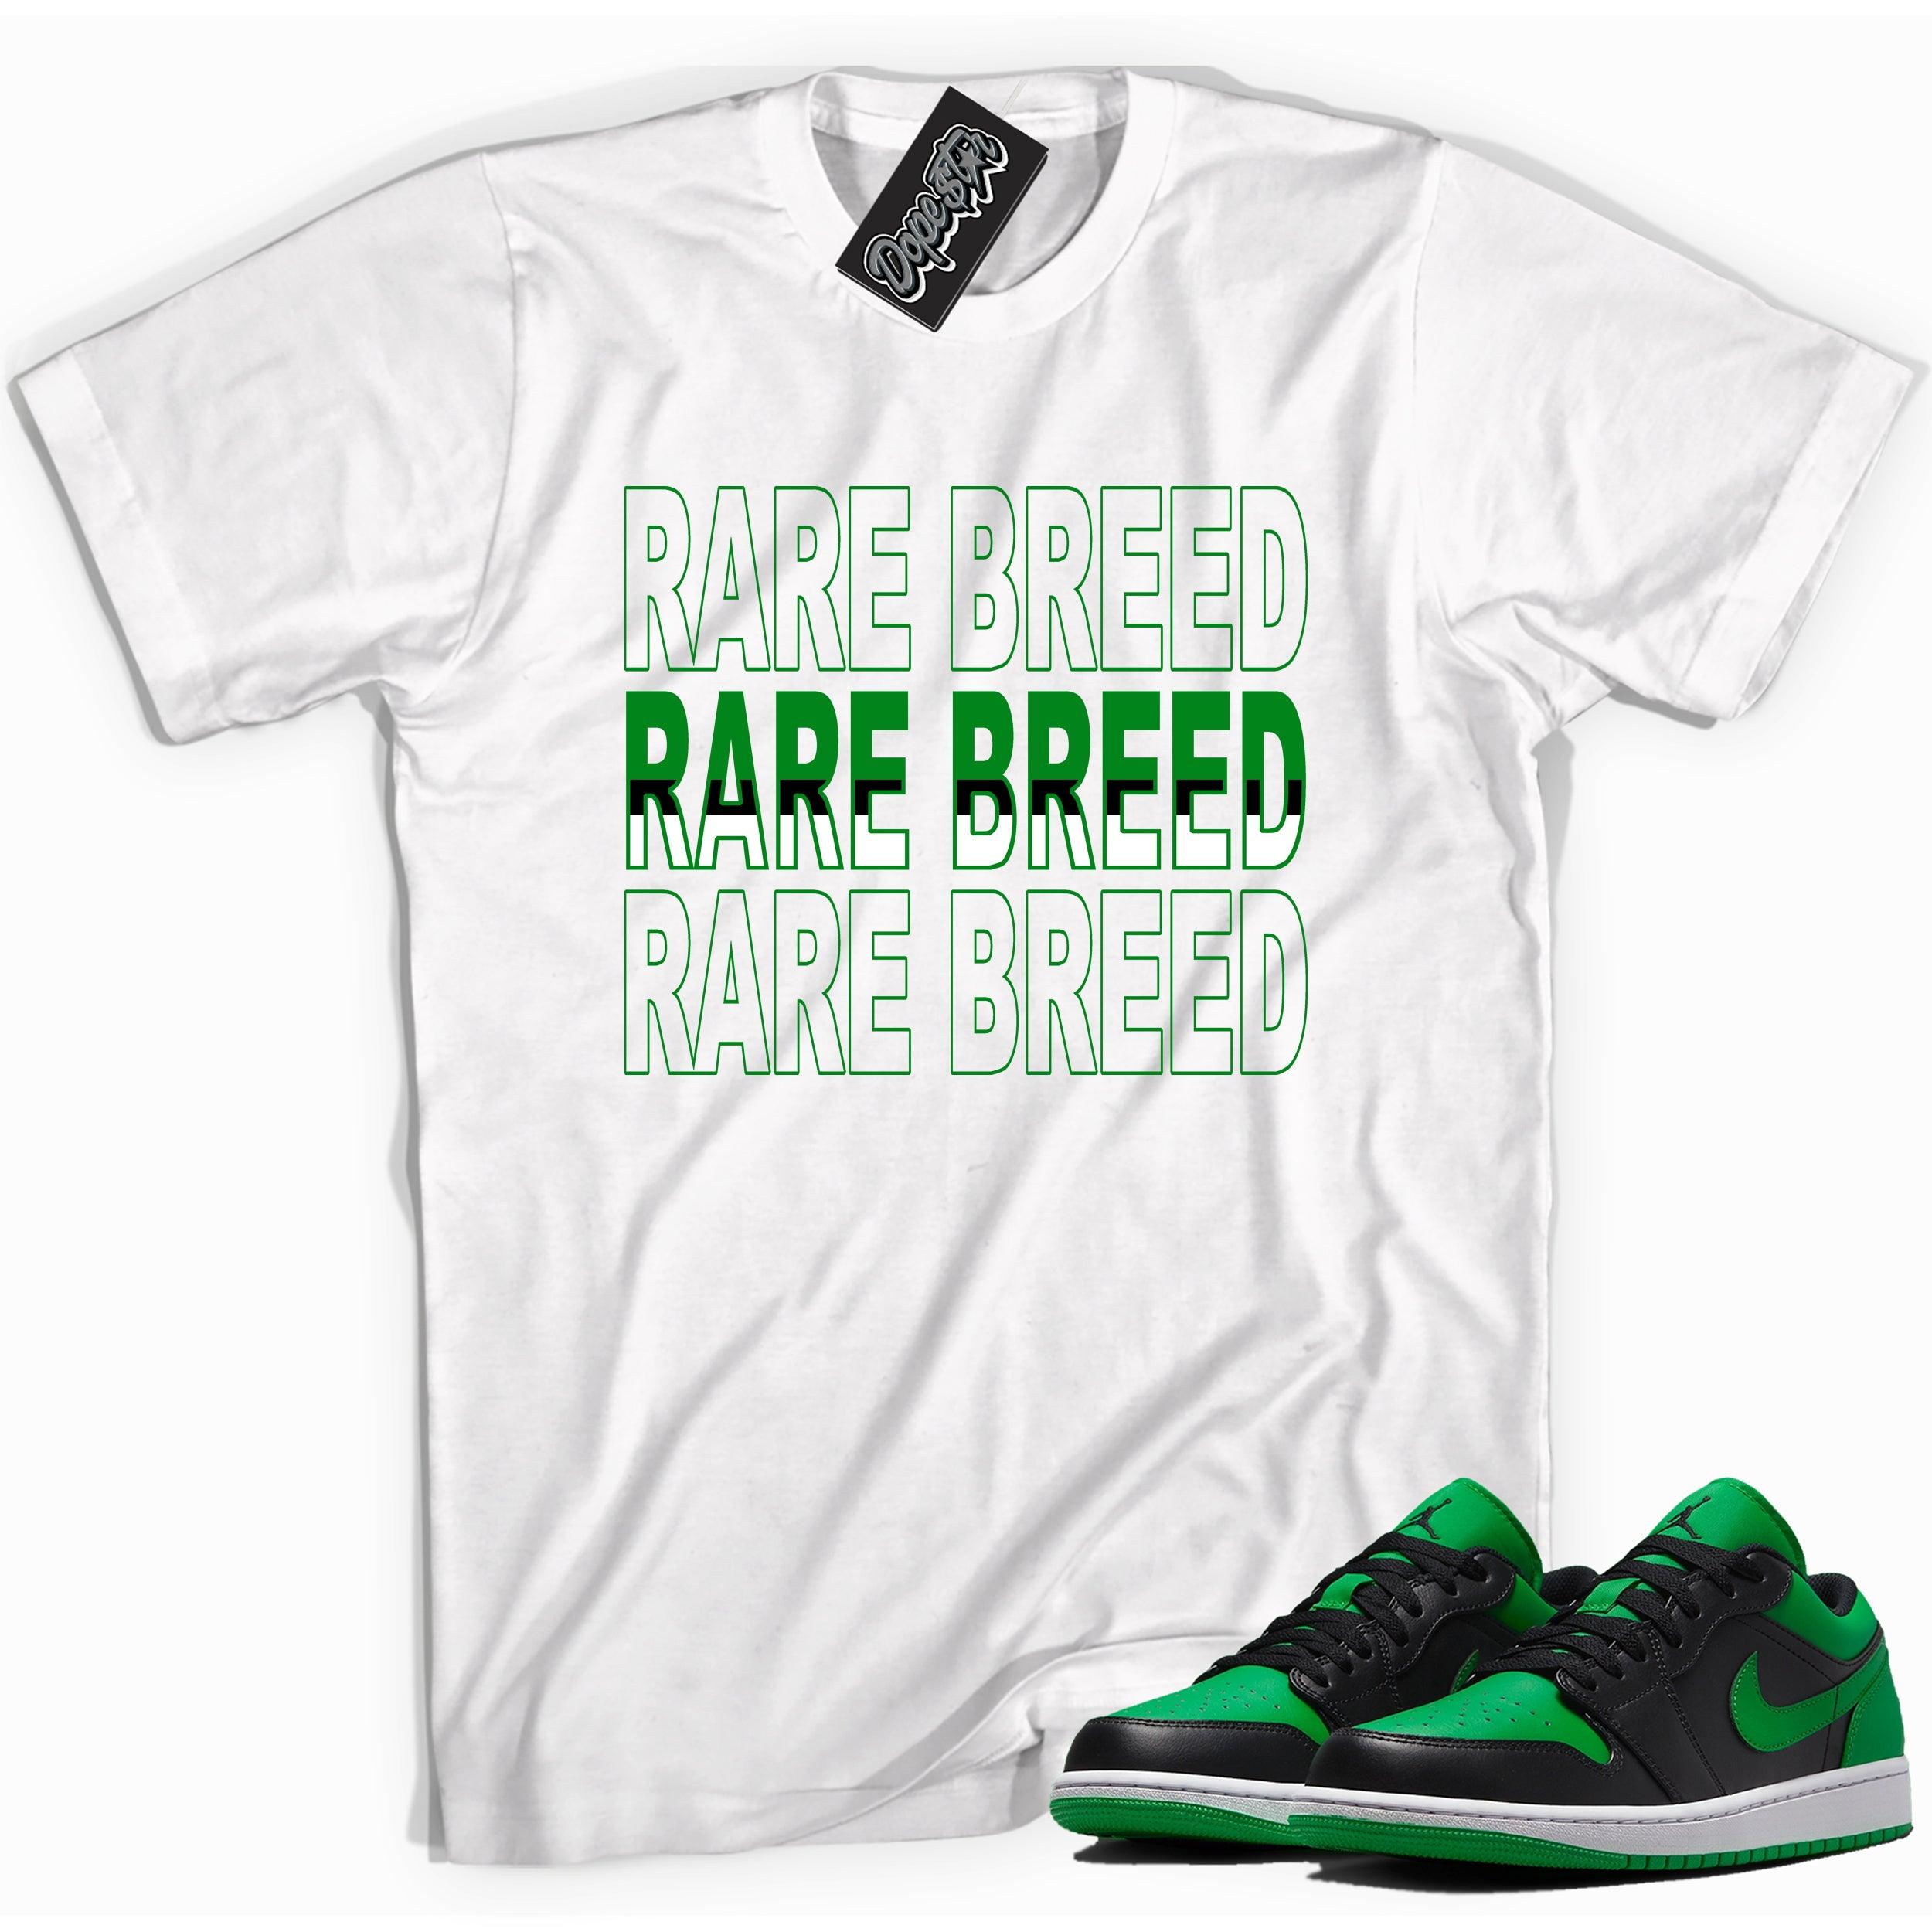 Cool white graphic tee with 'rare breed' print, that perfectly matches Air Jordan 1 Low Lucky Green sneakers